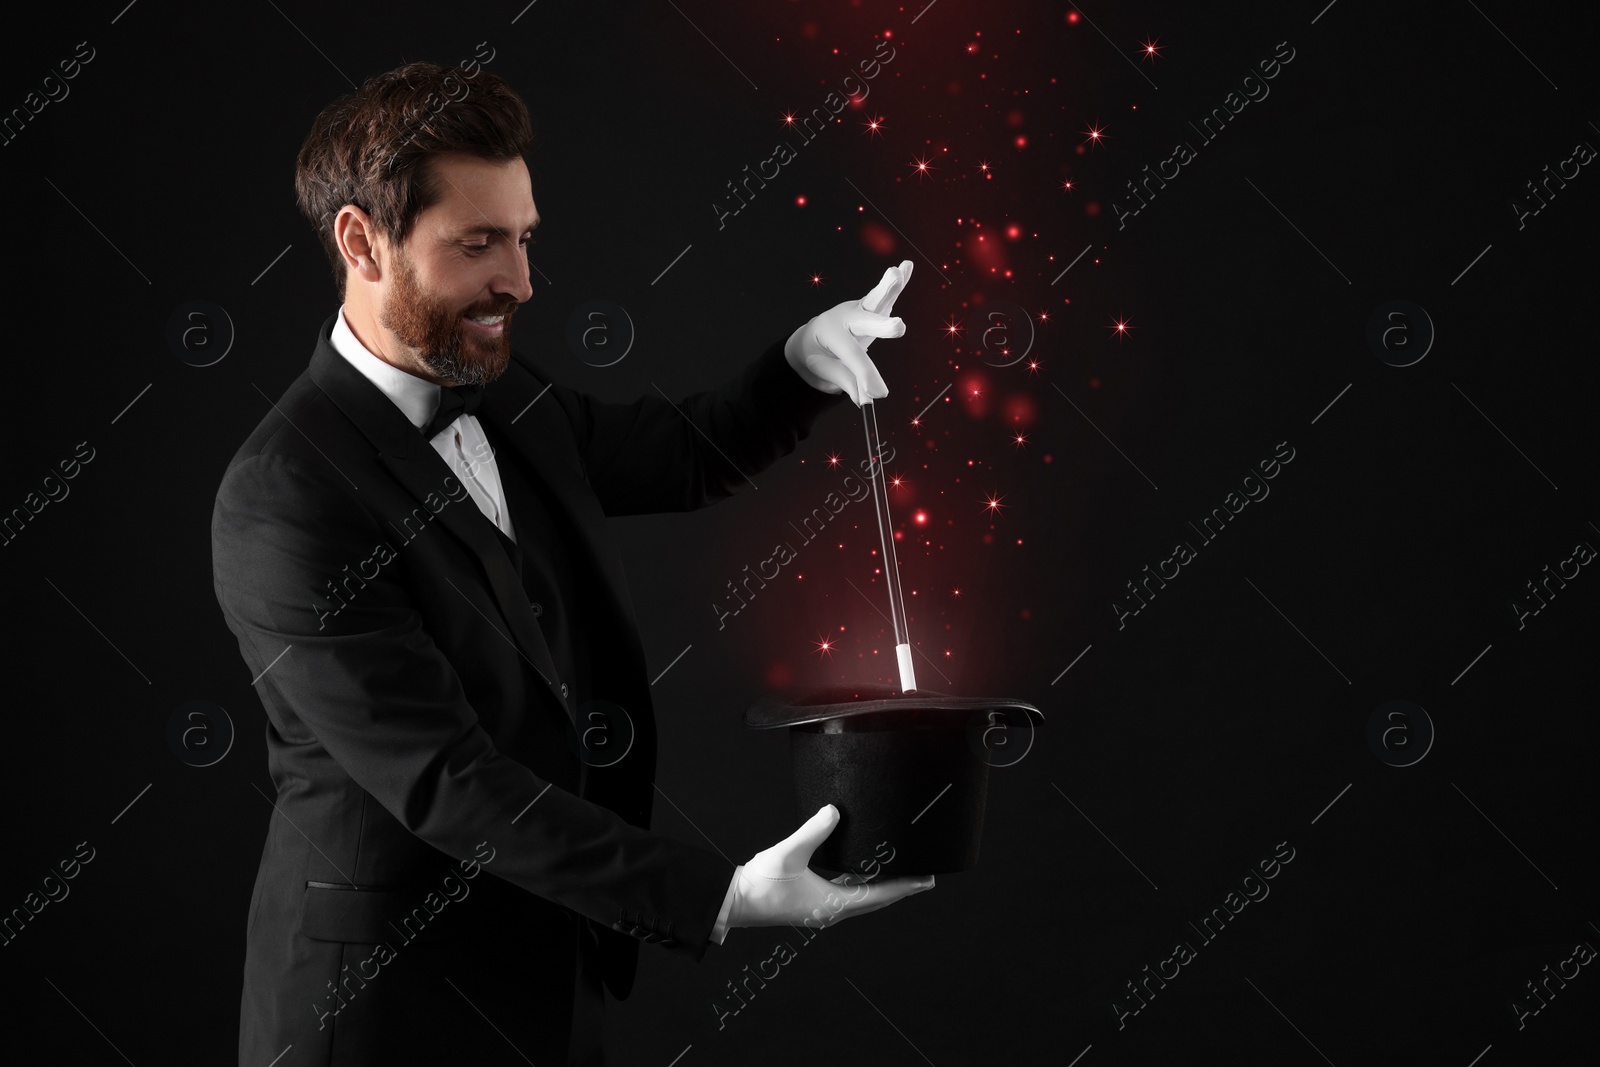 Image of Smiling magician showing trick with wand and top hat on black background